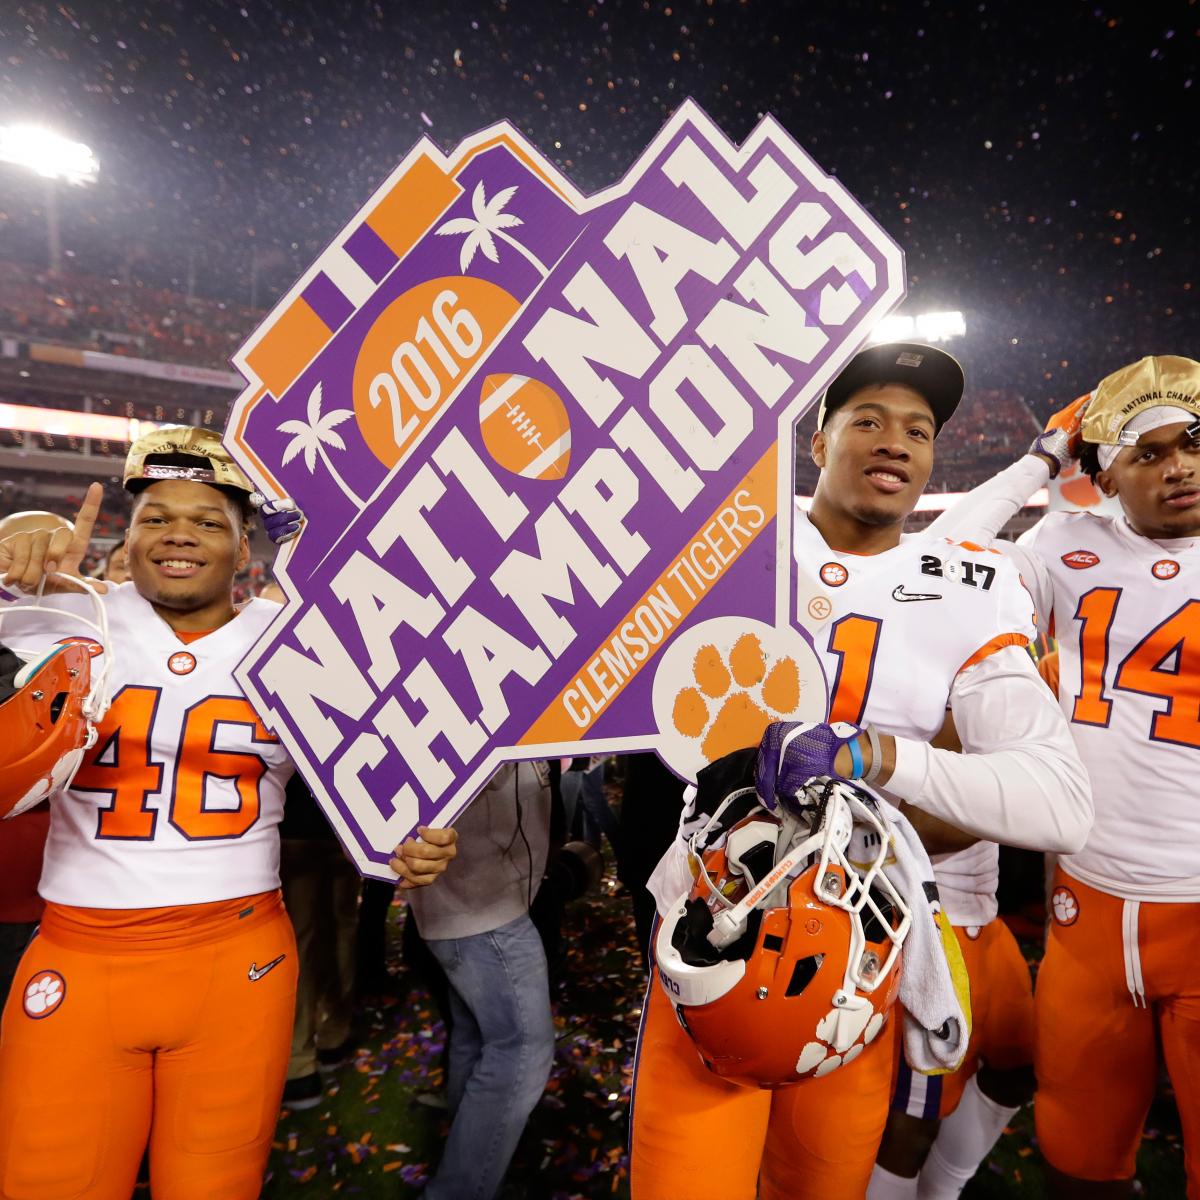 Clemson football parade: Here's what you need to know